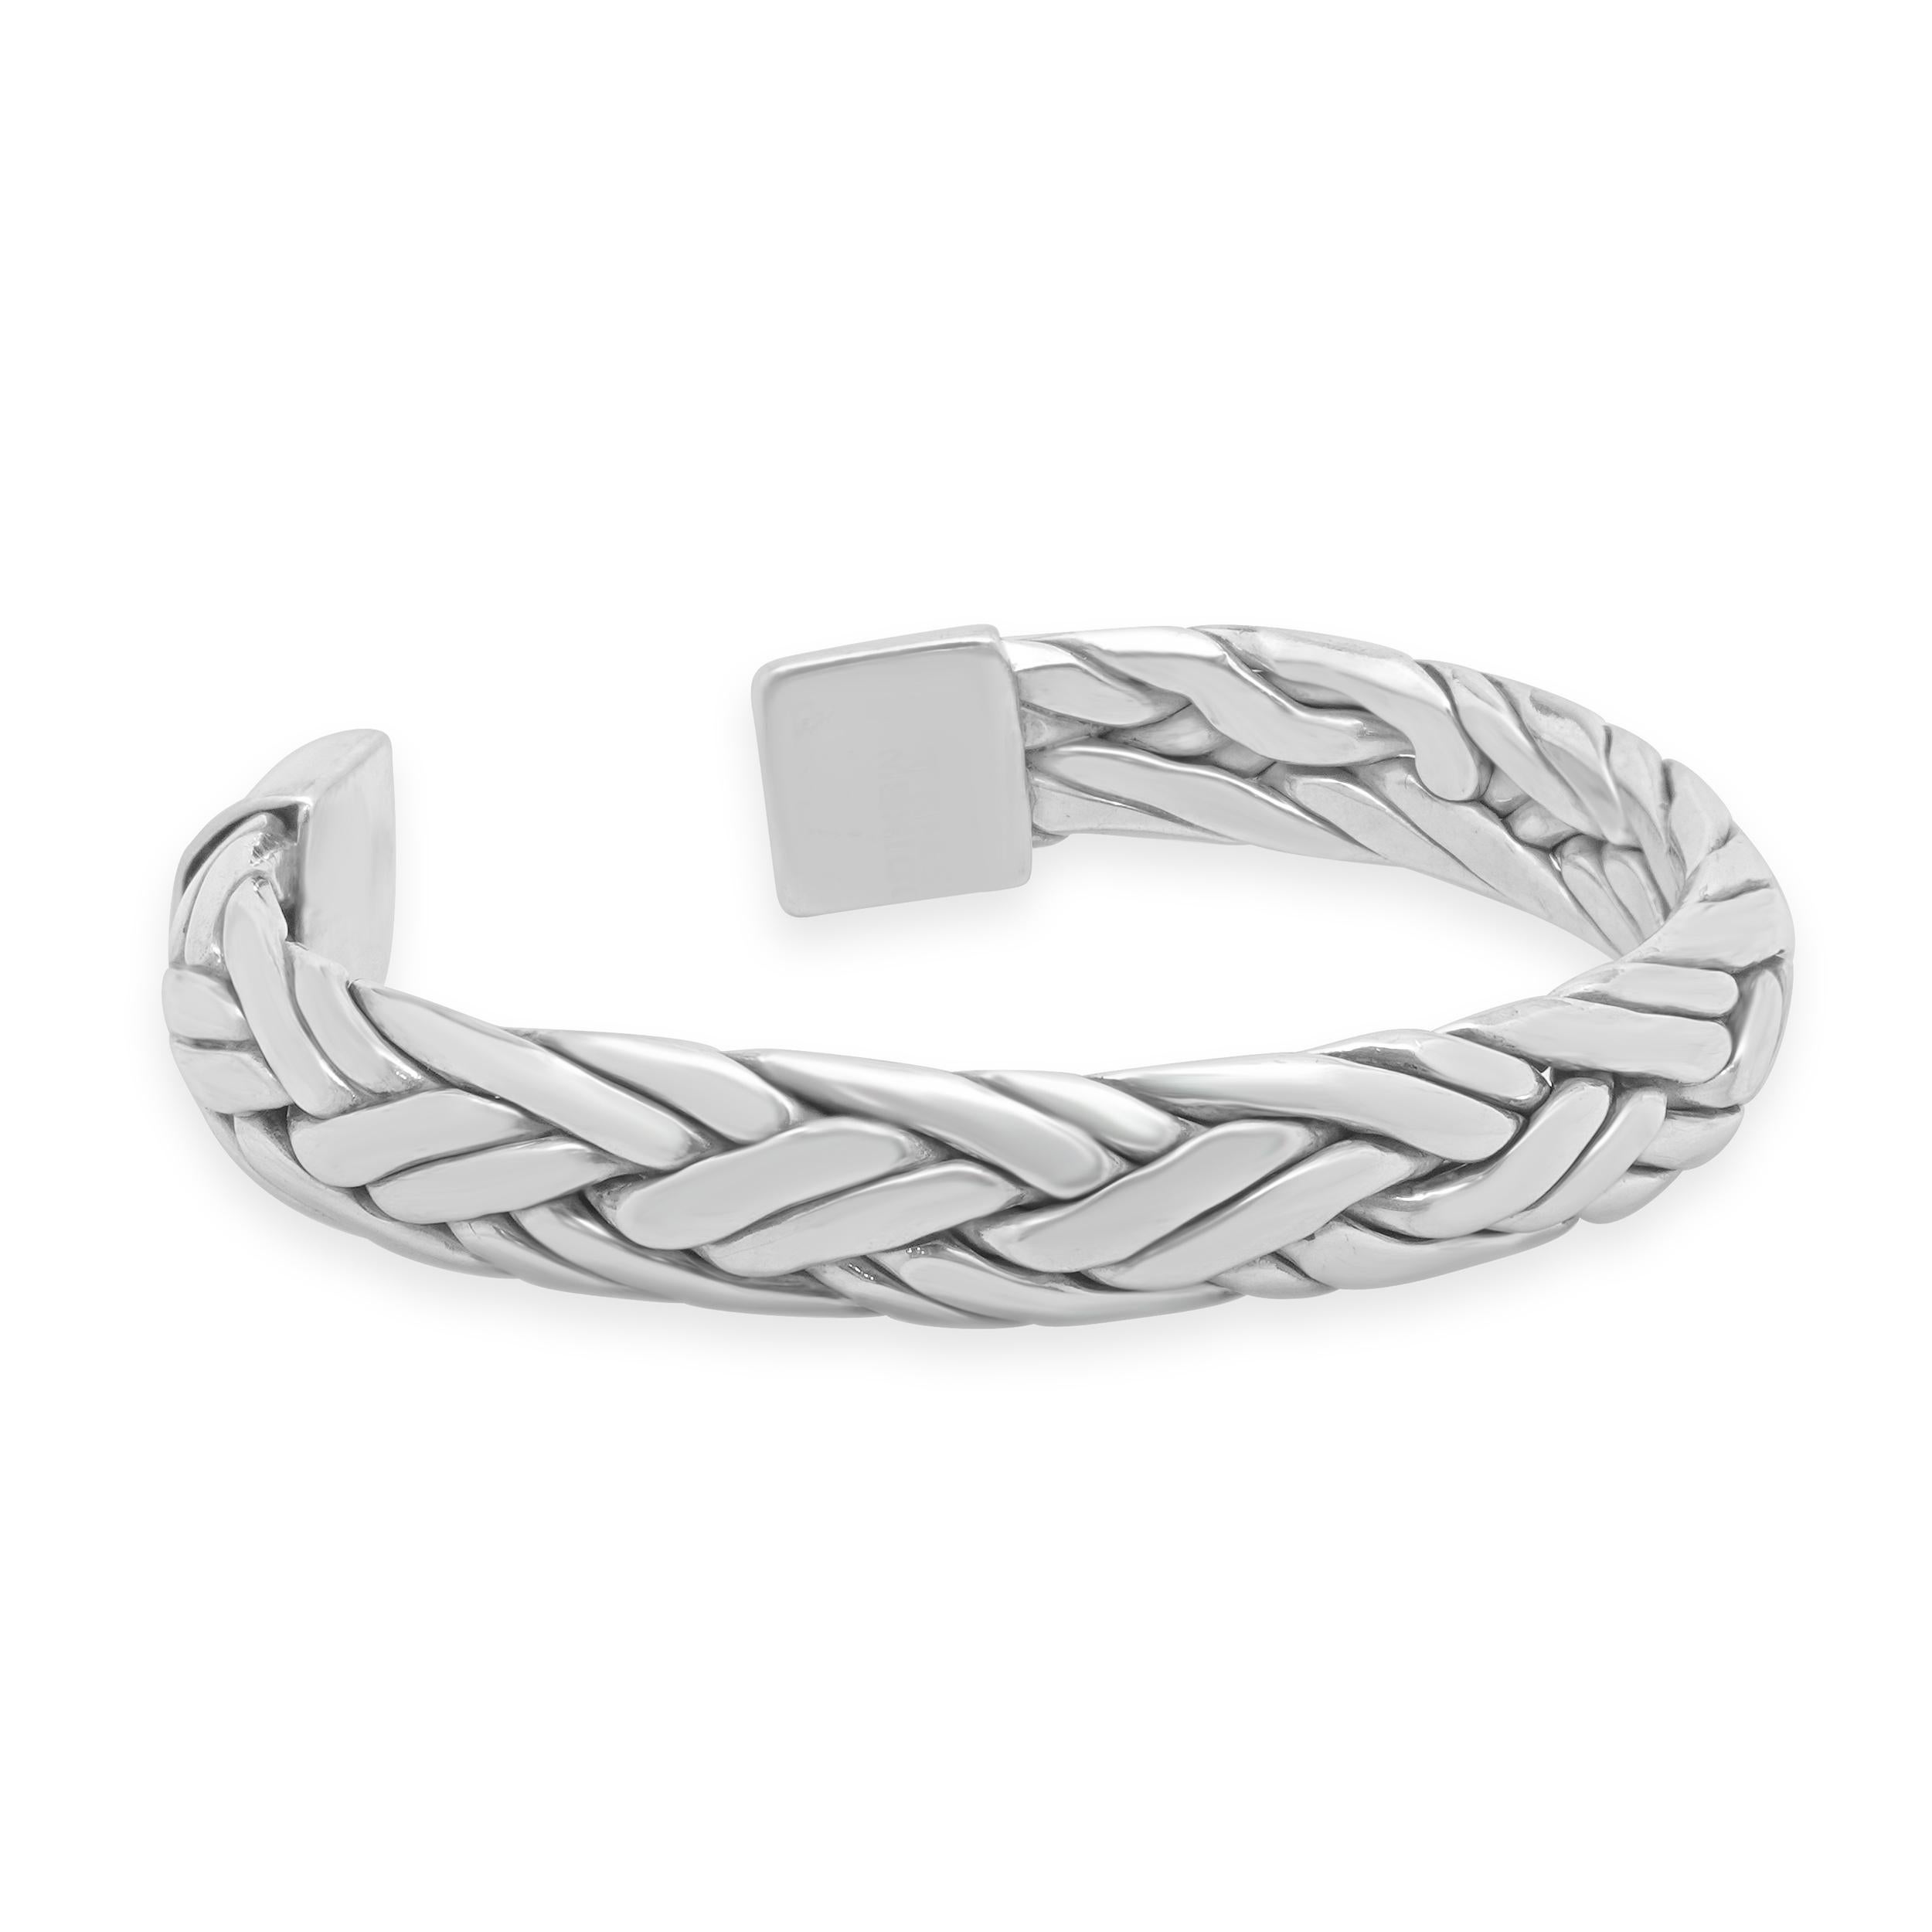 Designer: custom
Material: sterling silver
Dimensions: bracelet will fit up to a 6.75-inch wrist
Weight: 57.84 grams
